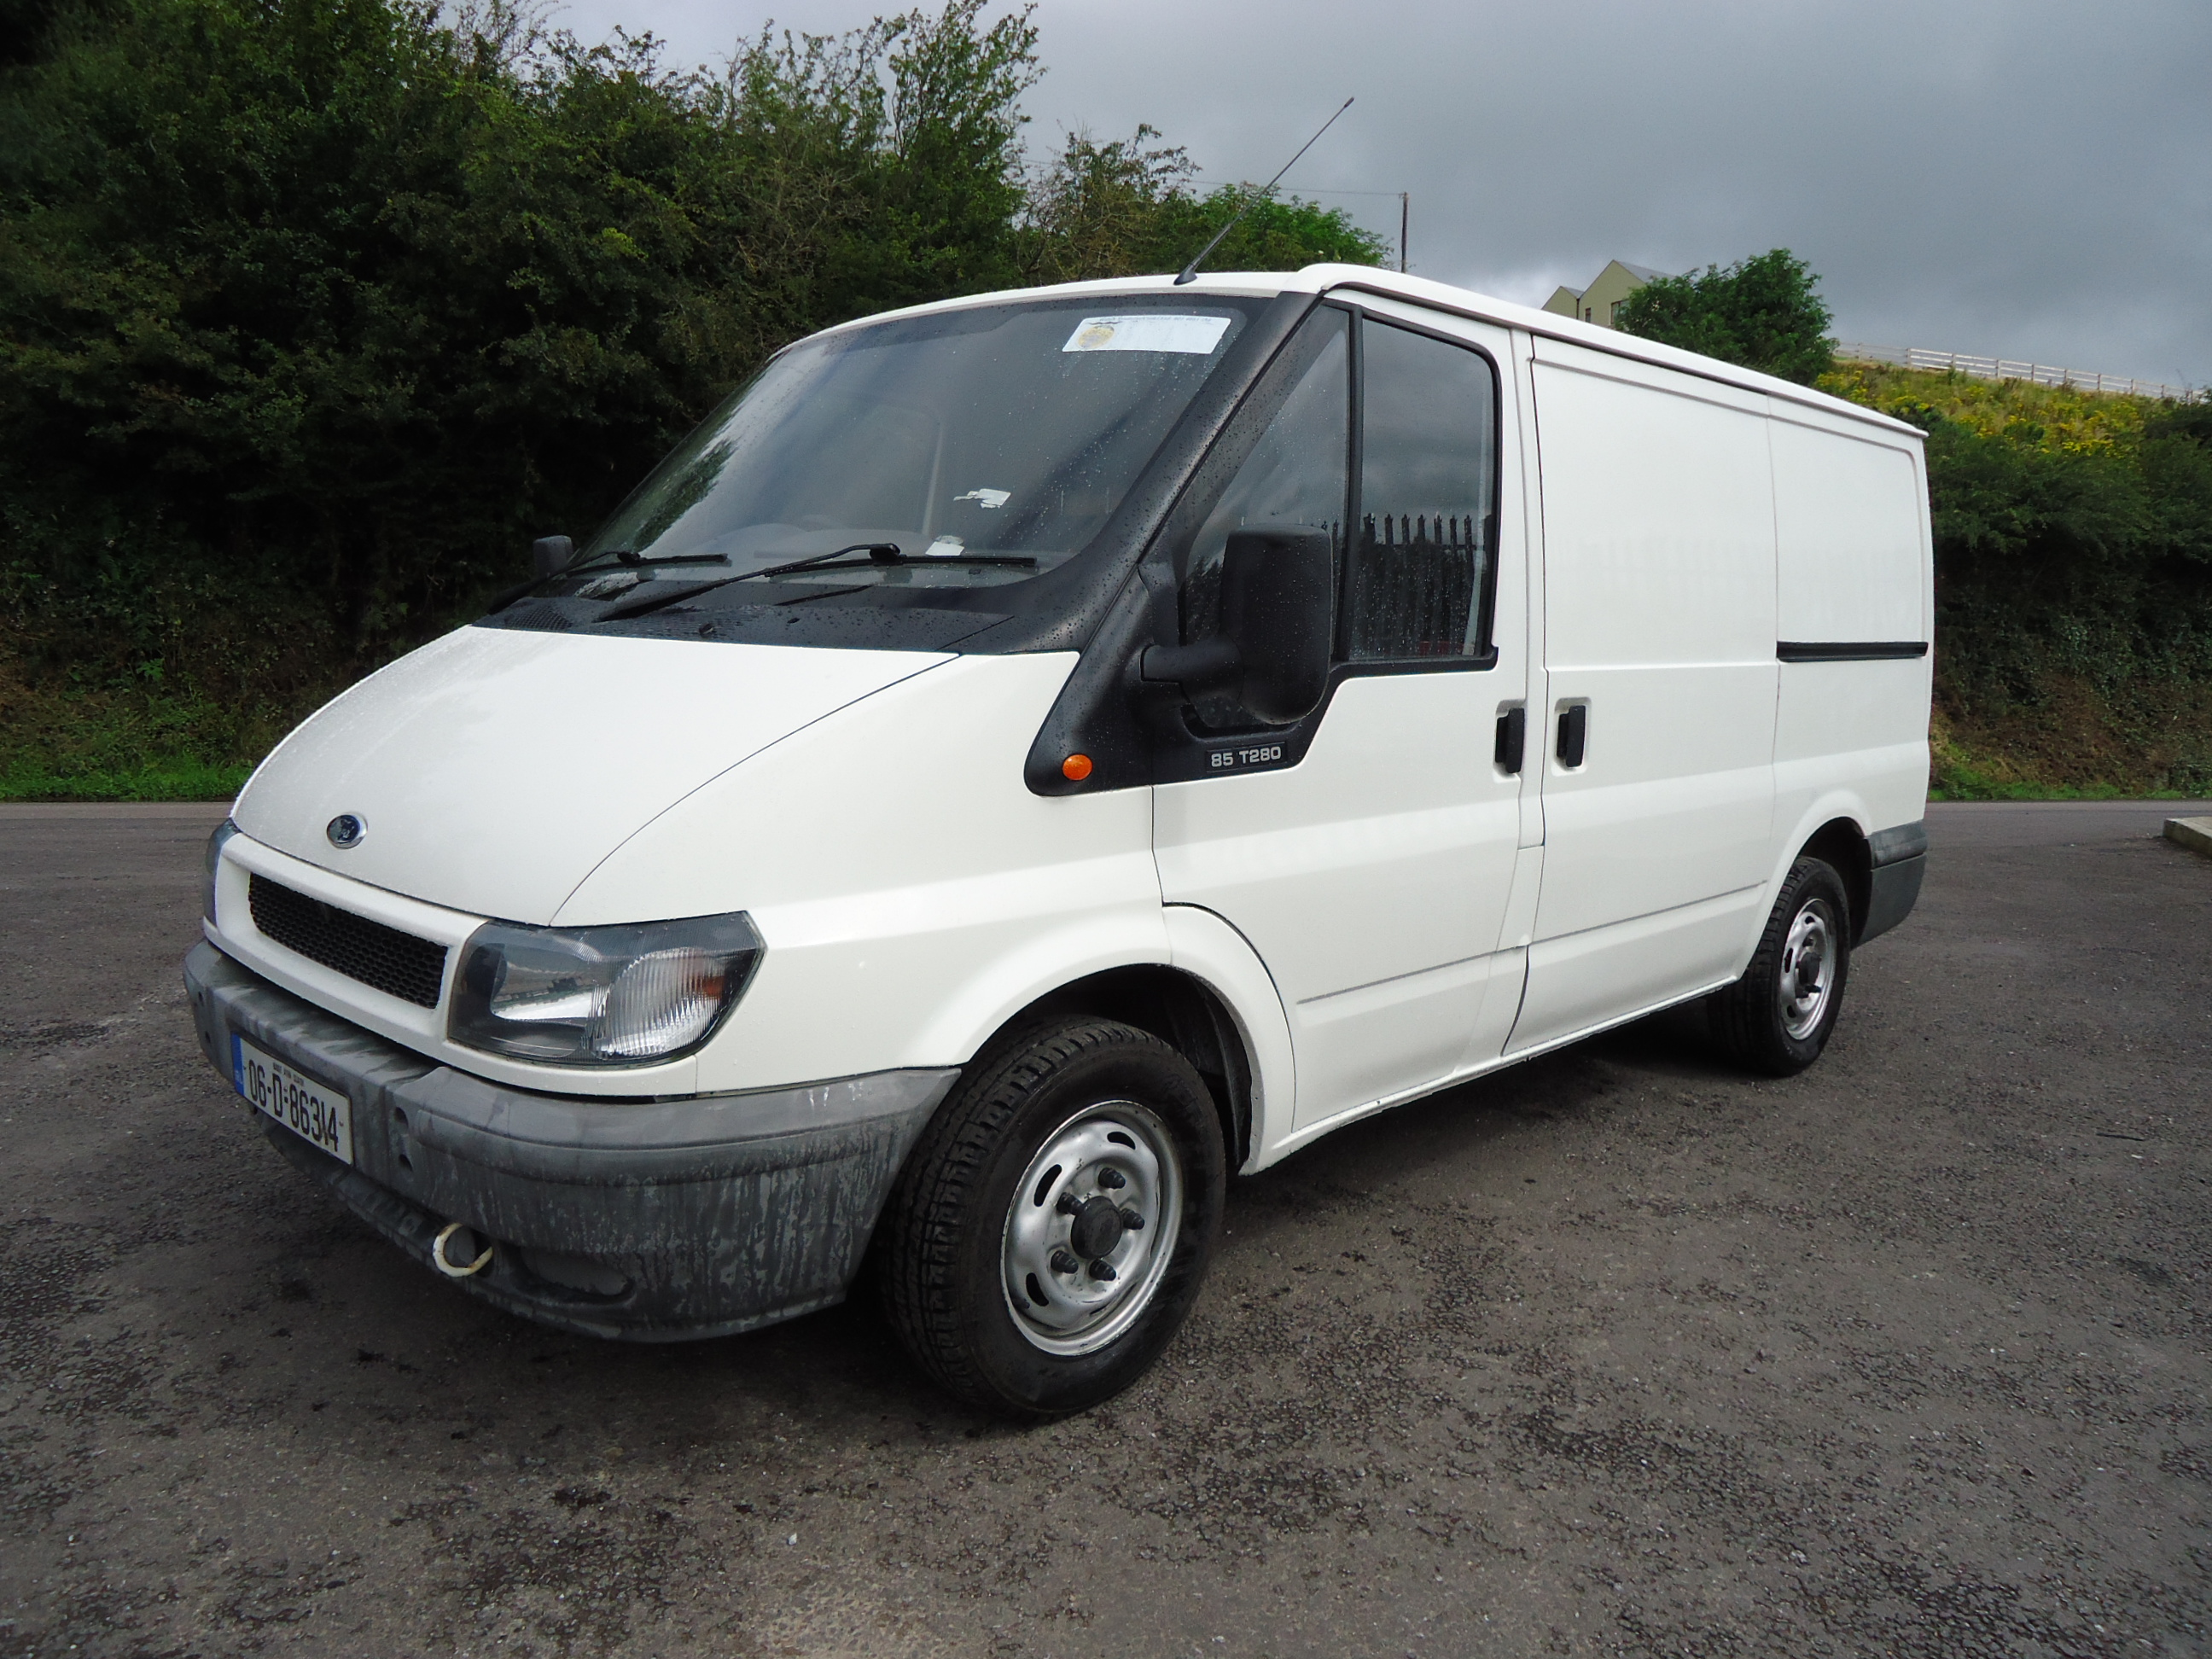 Ford Transit 2006: Review, Amazing Pictures and Images ...